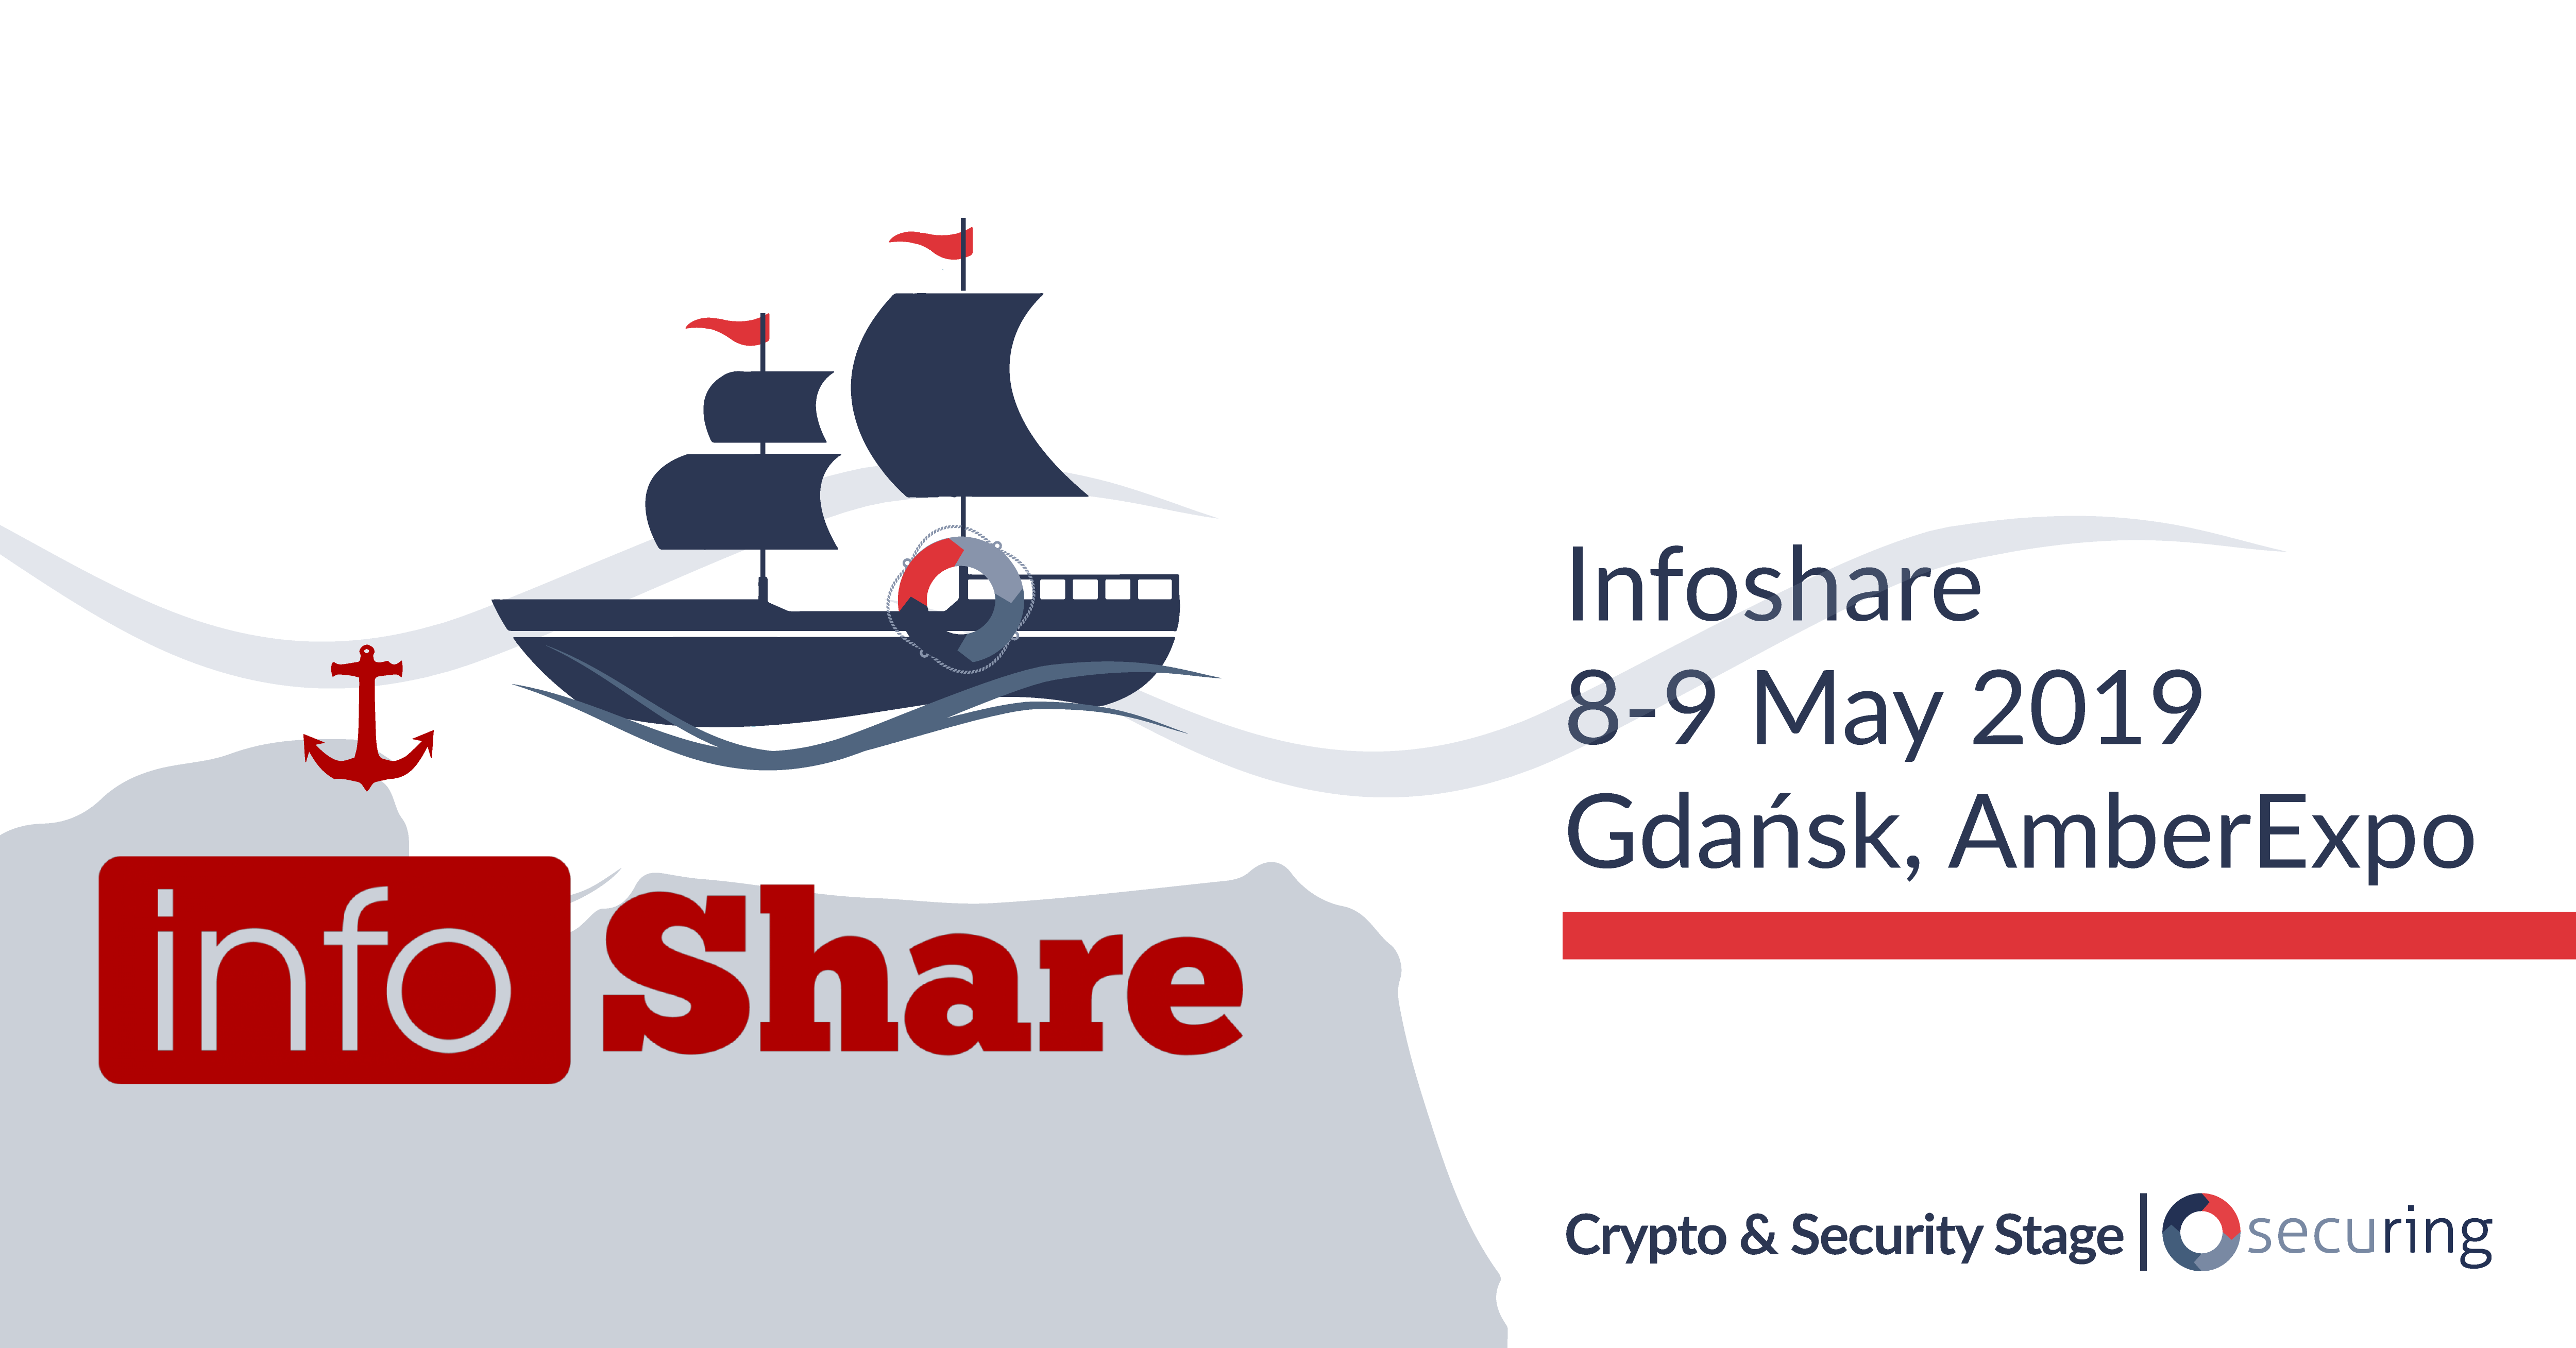 Infoshare 2019: Let’s meet us at Crypto&Security Stage ...